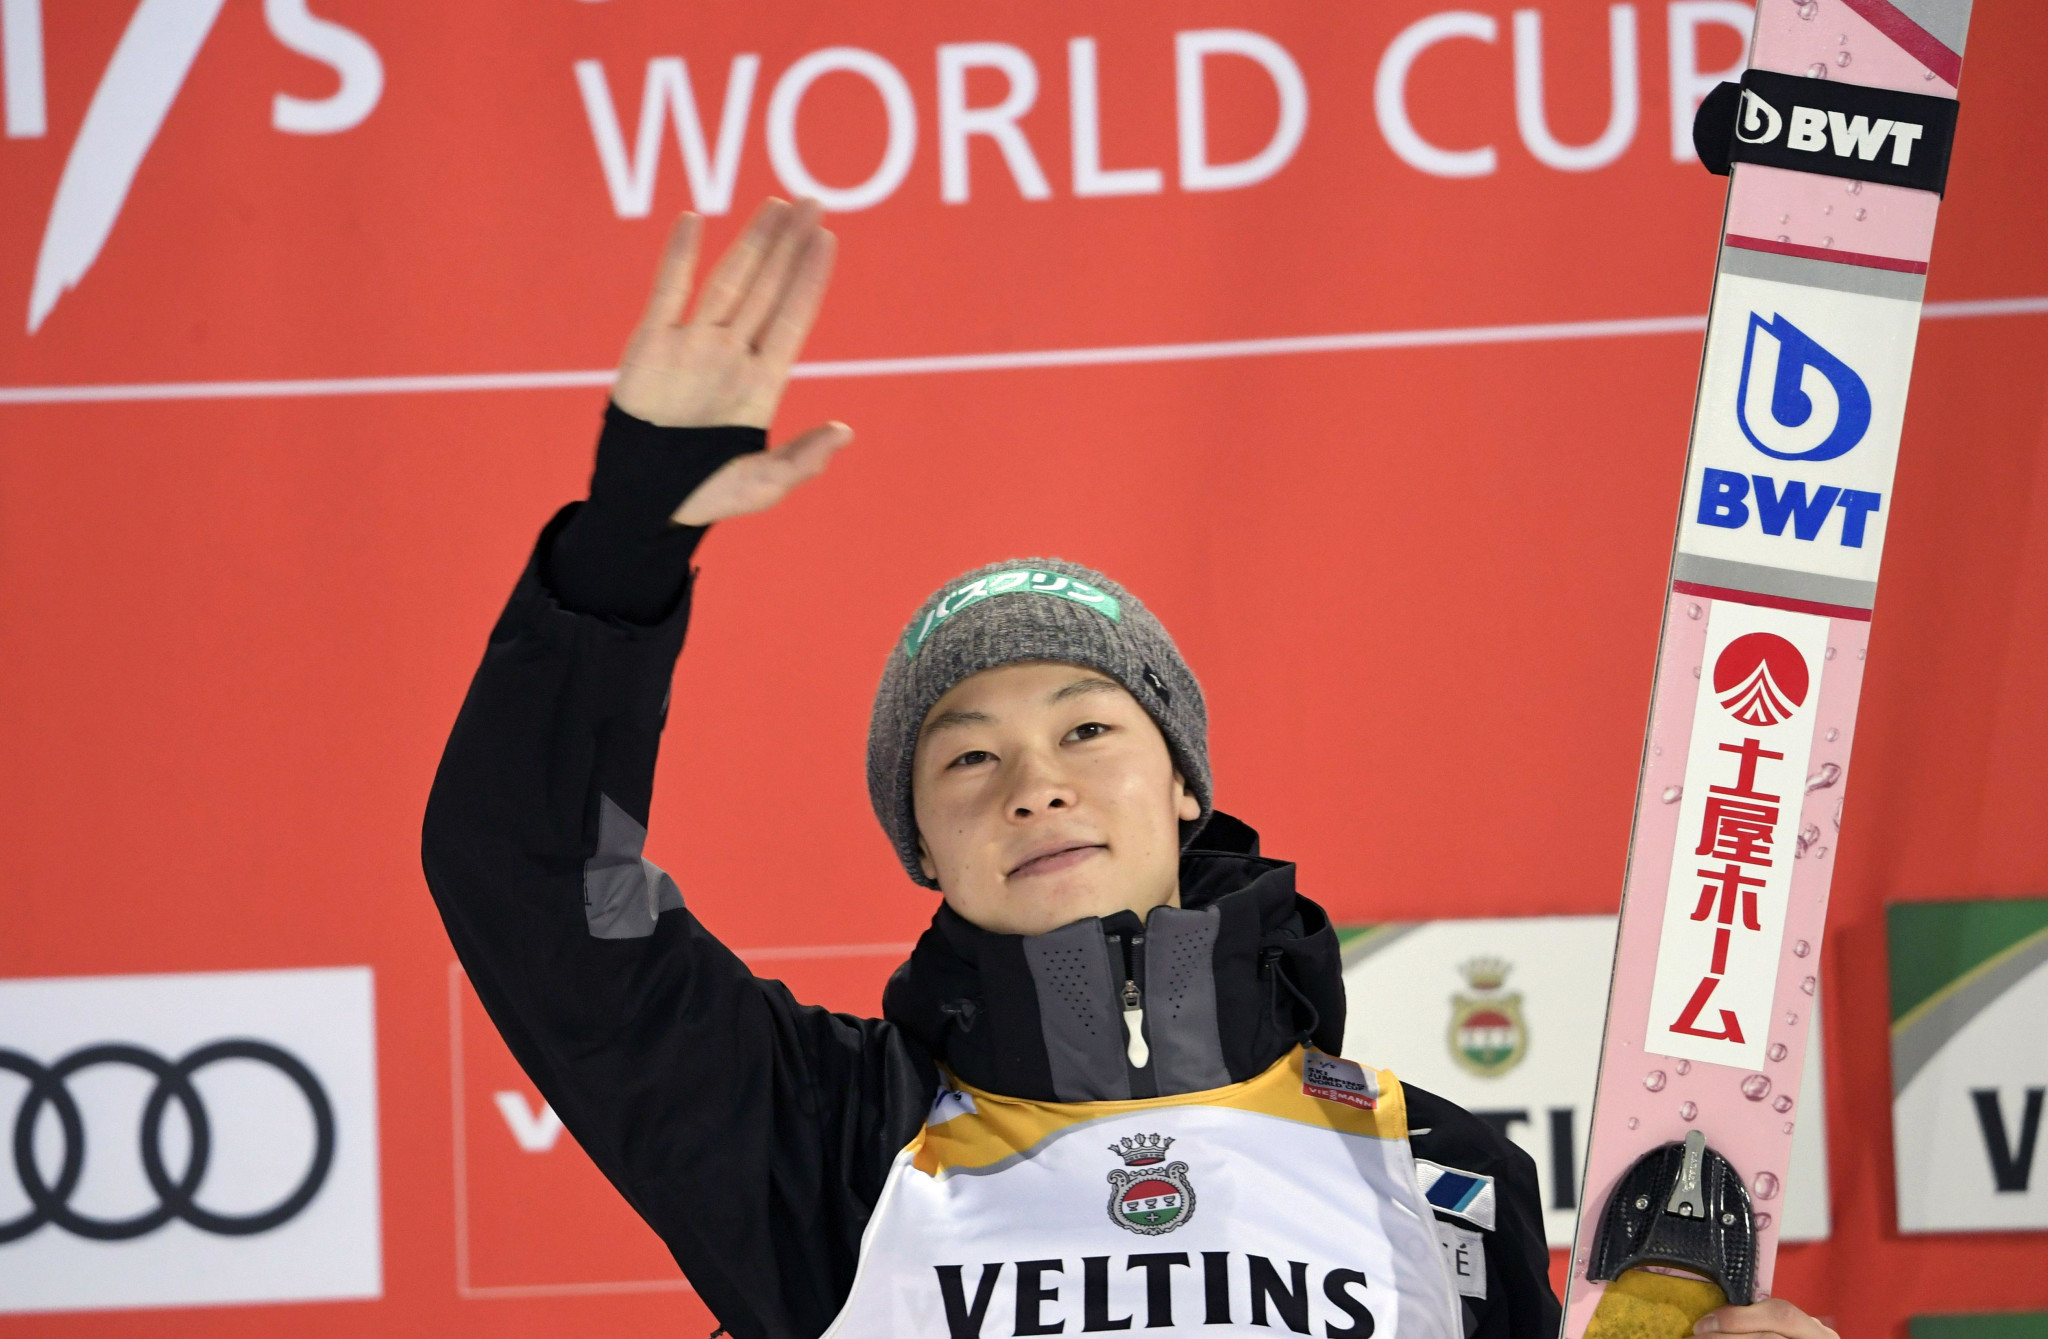 Japan's Ryoyu Kobayashi triumphed in the second men's event of the FIS Ski Jumping World Cup in Willingen ©Getty Images